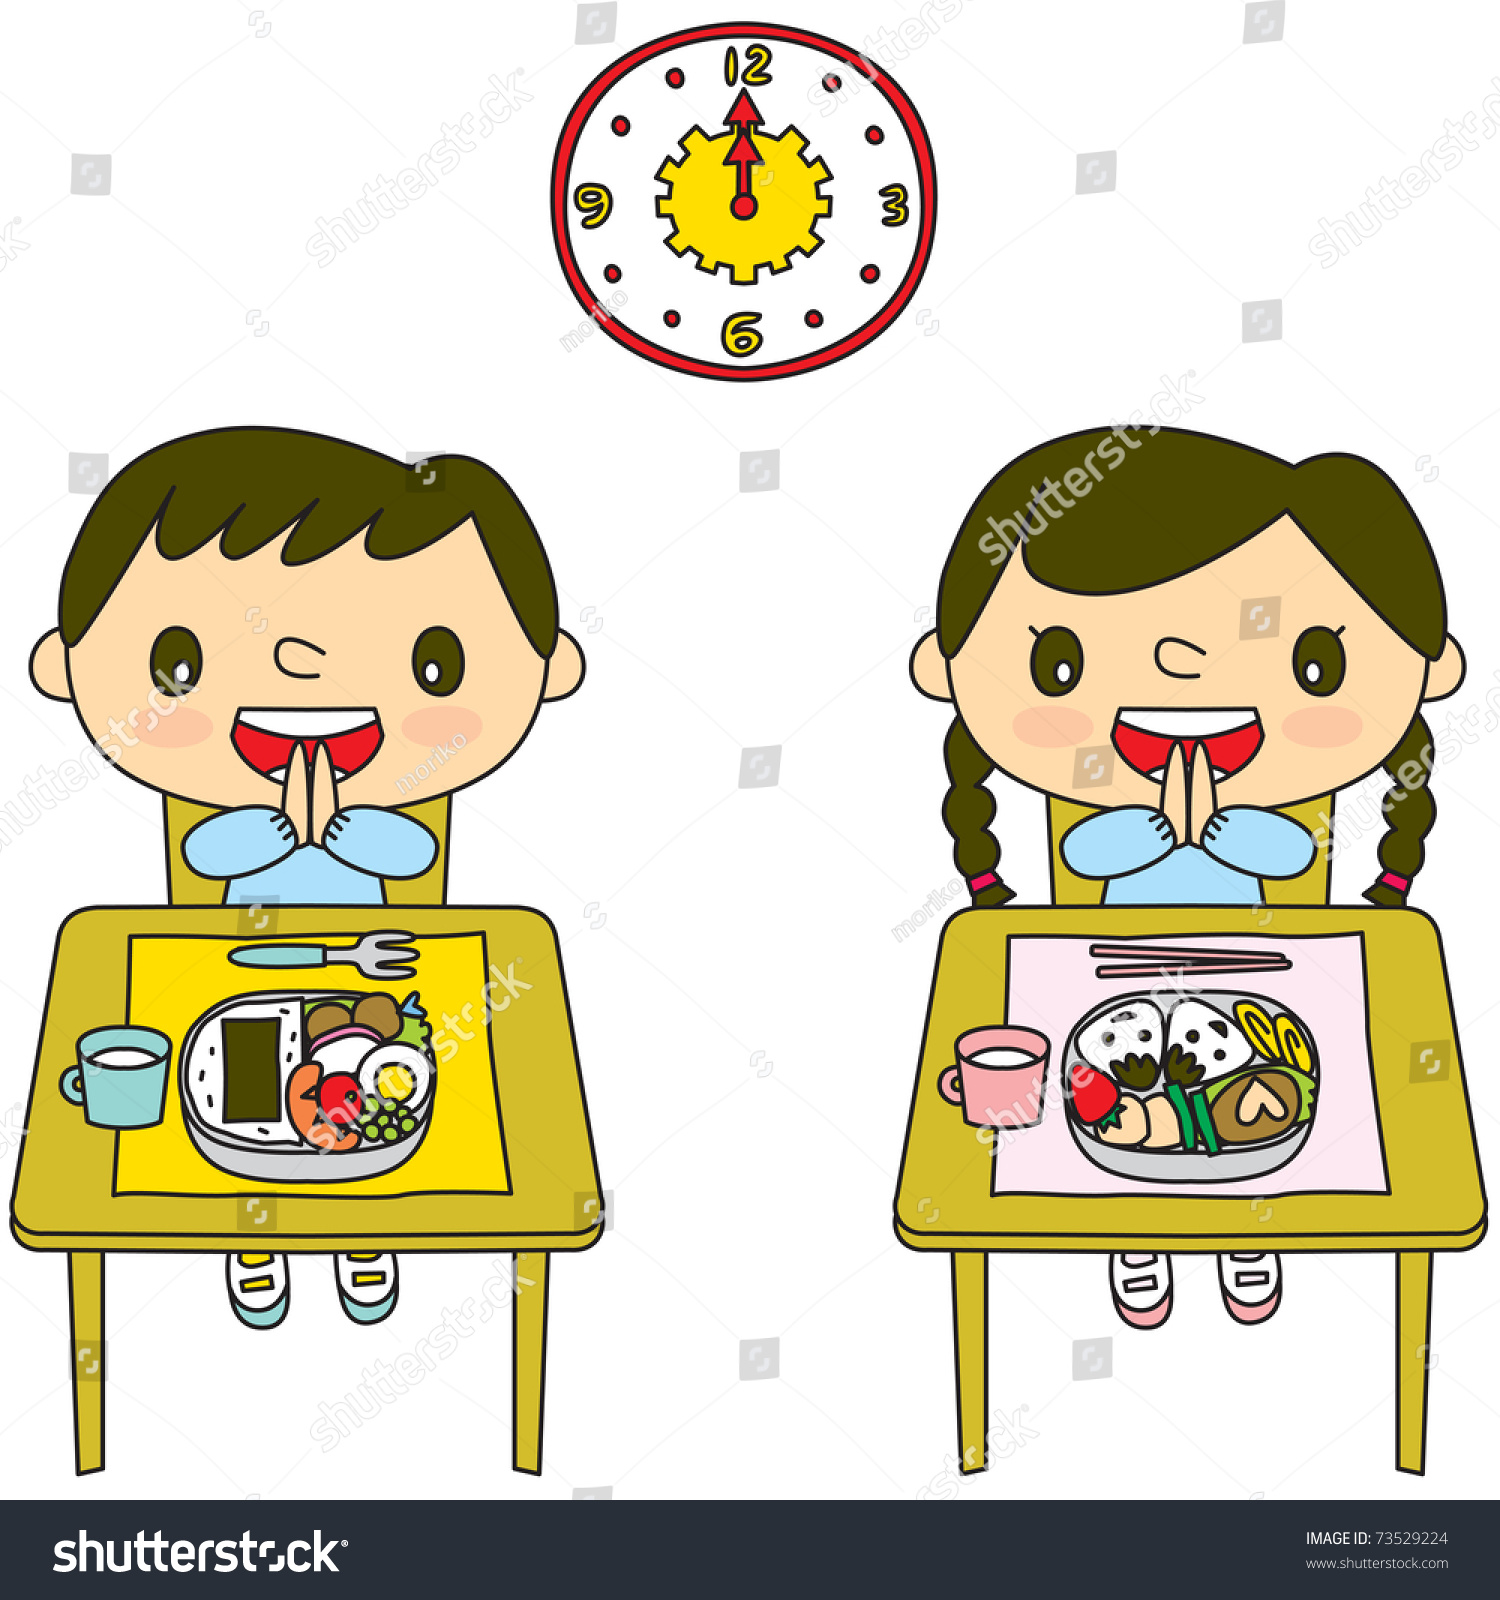 free animated lunch clipart - photo #41